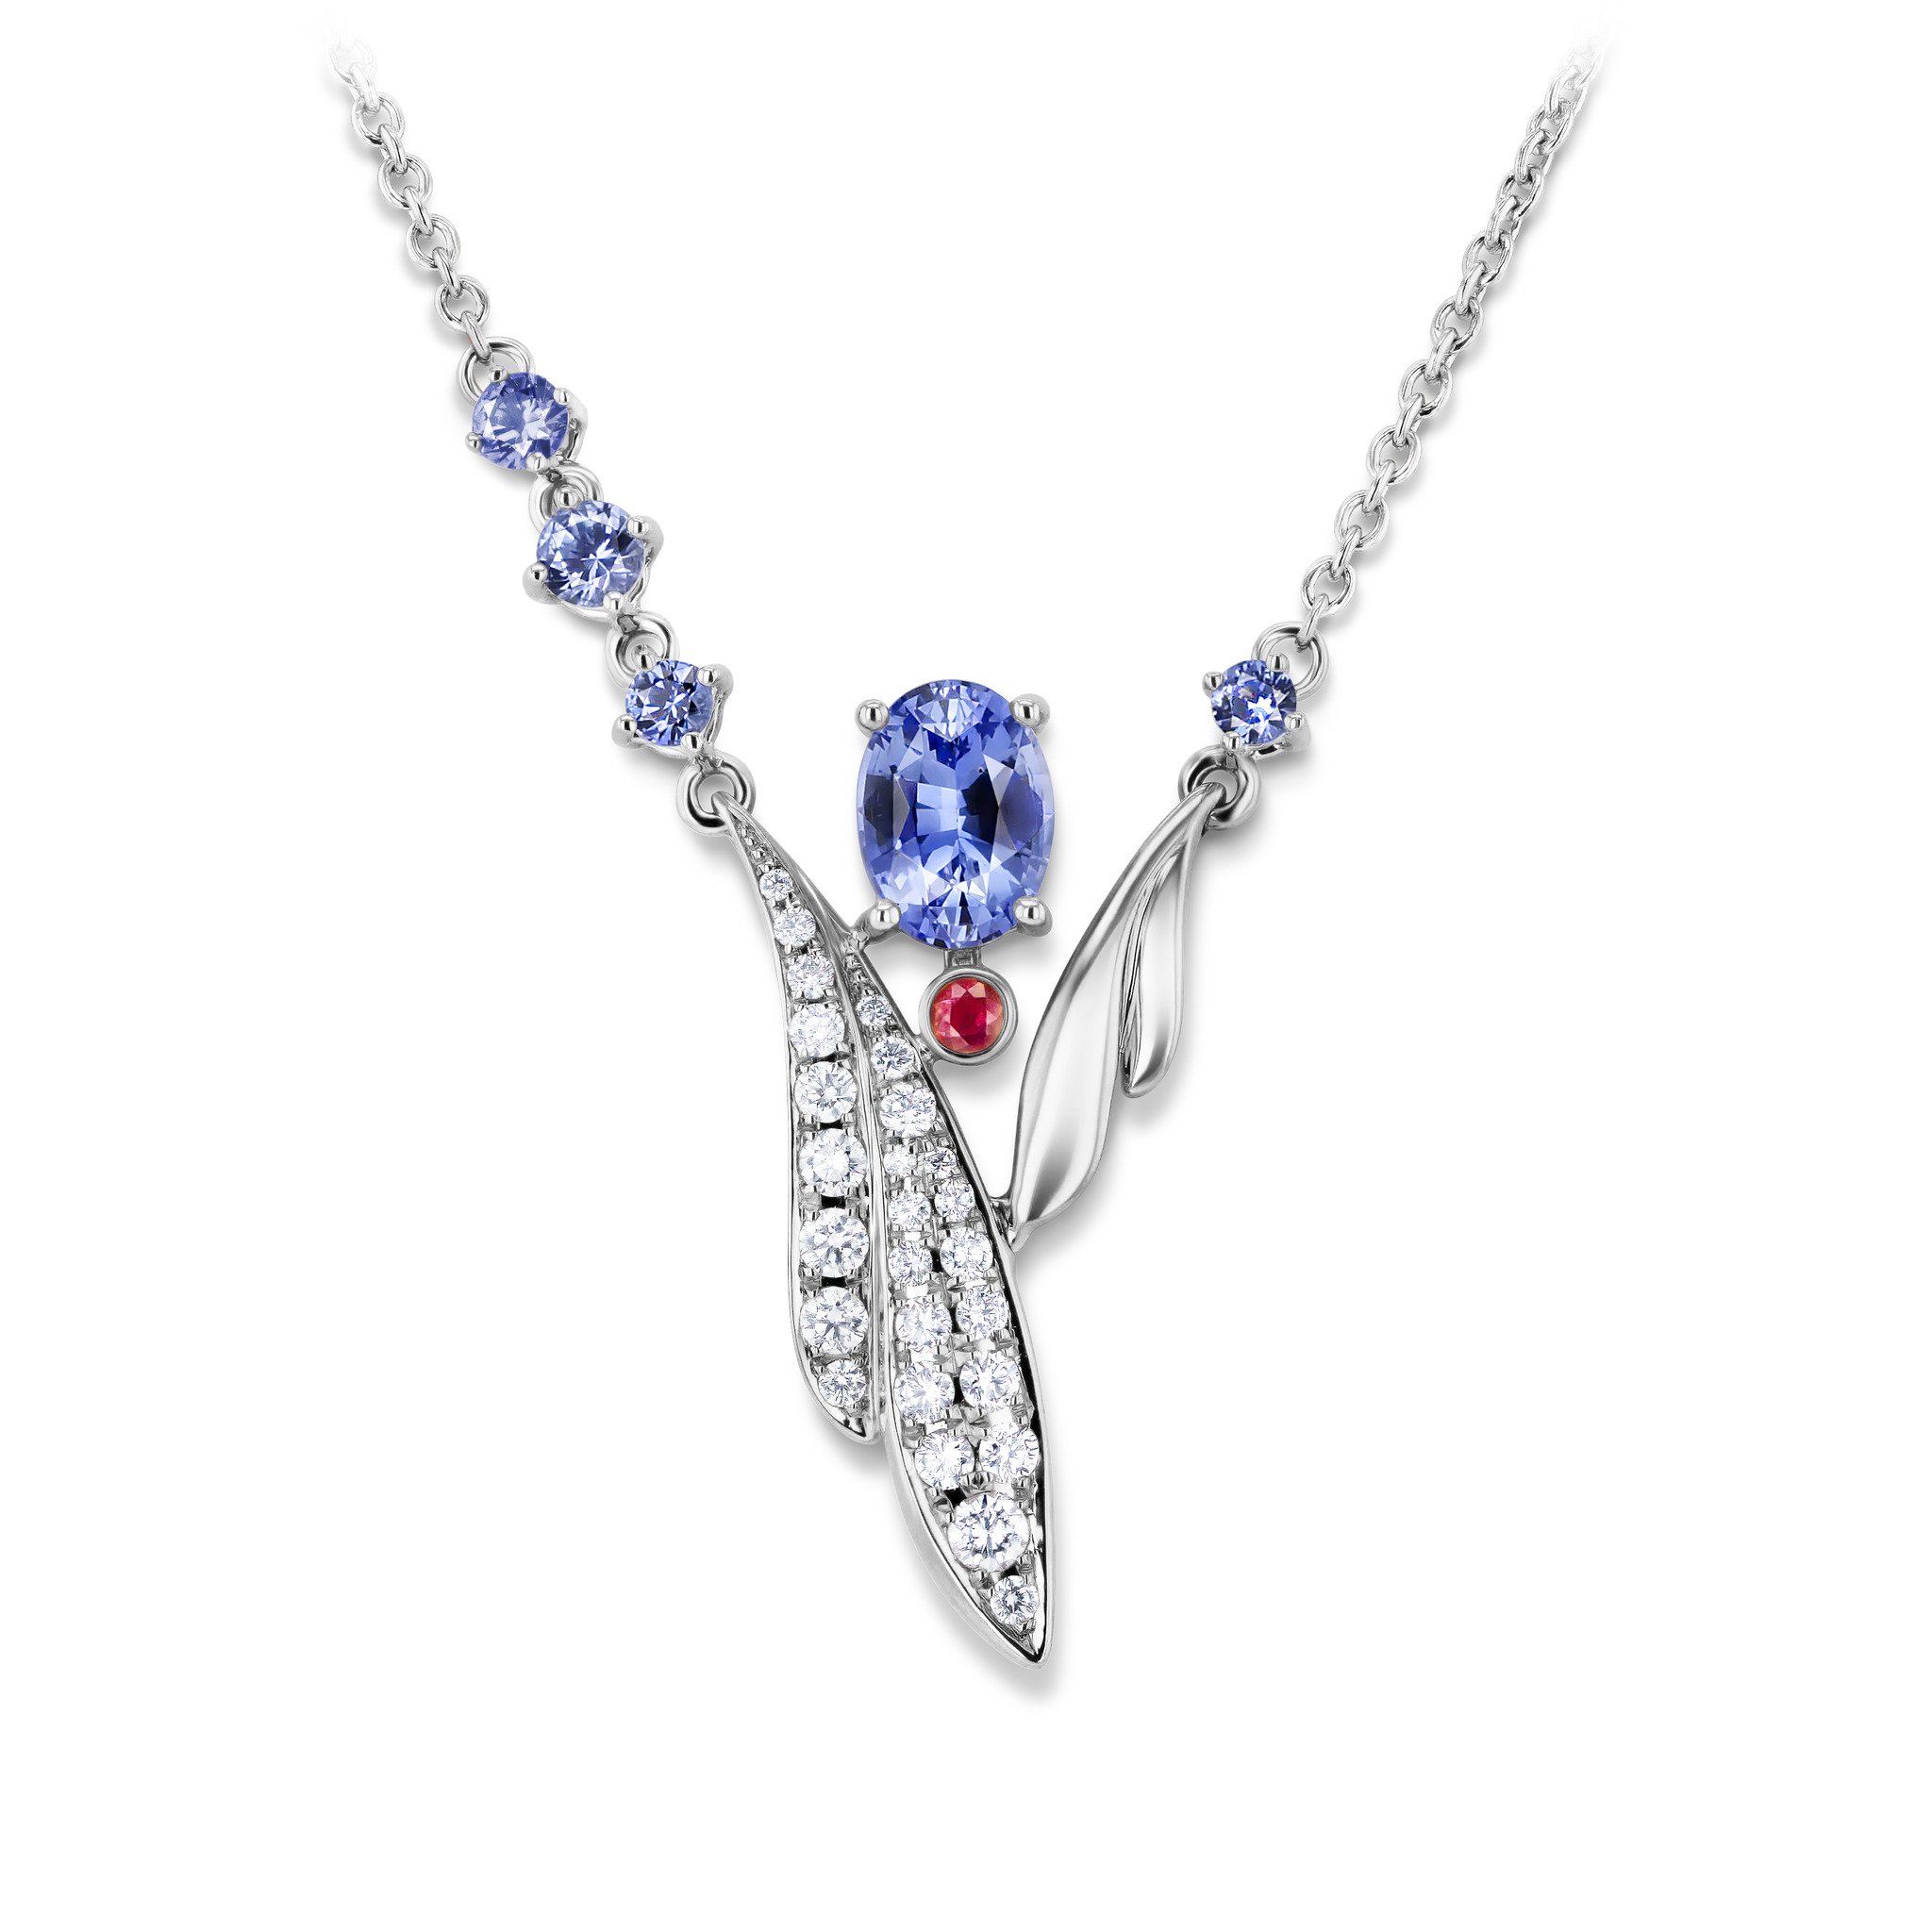 Necklace with sapphires